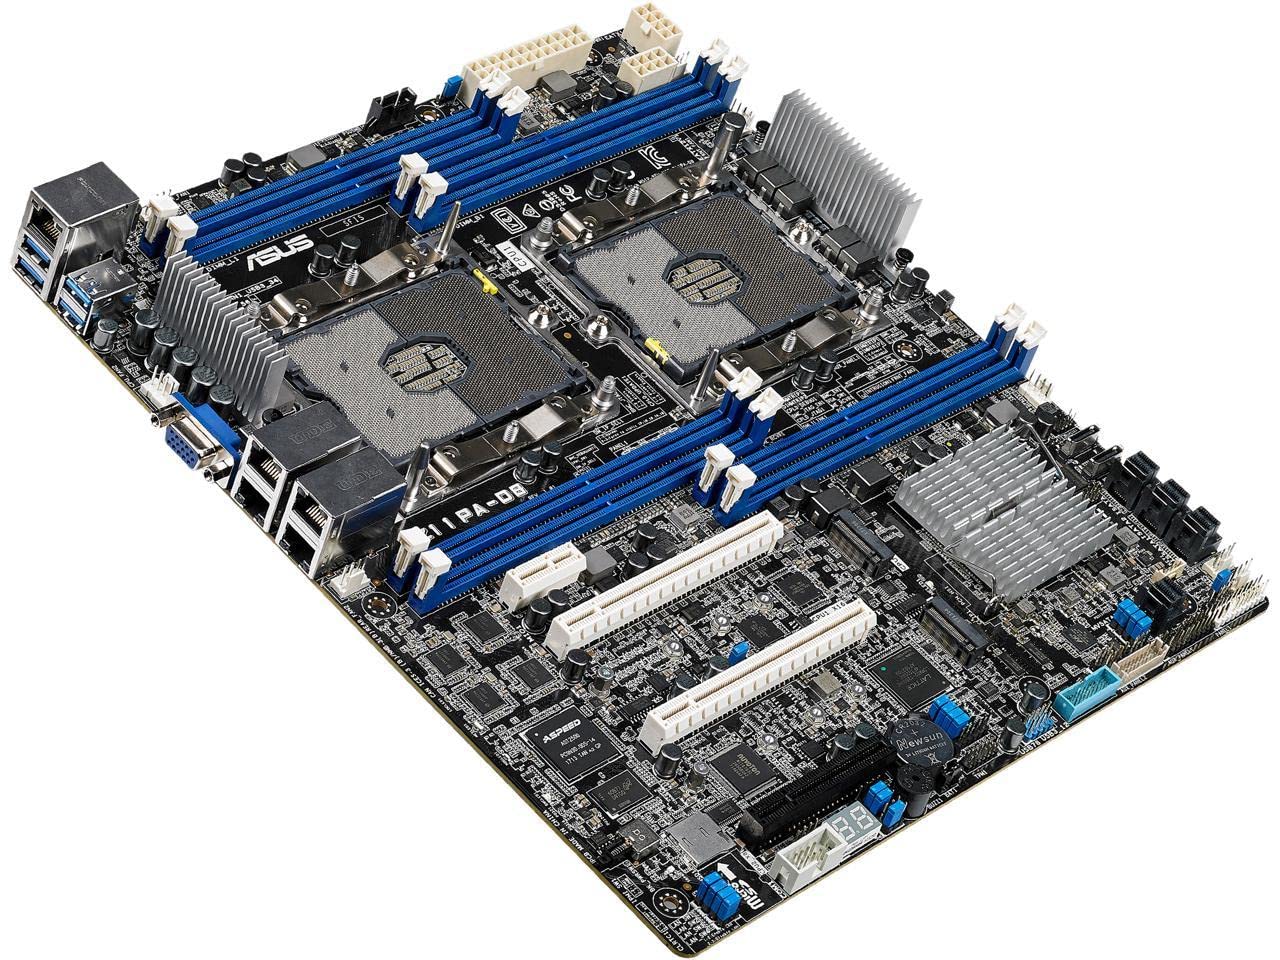 Asus Z11PA-D8 Server And Workstation Motherboard Powered by Intel Xeon Scalable Platform features 8x DIMM slots supporting 3DS ECC RDIMMS-Motherboard-dealsplant